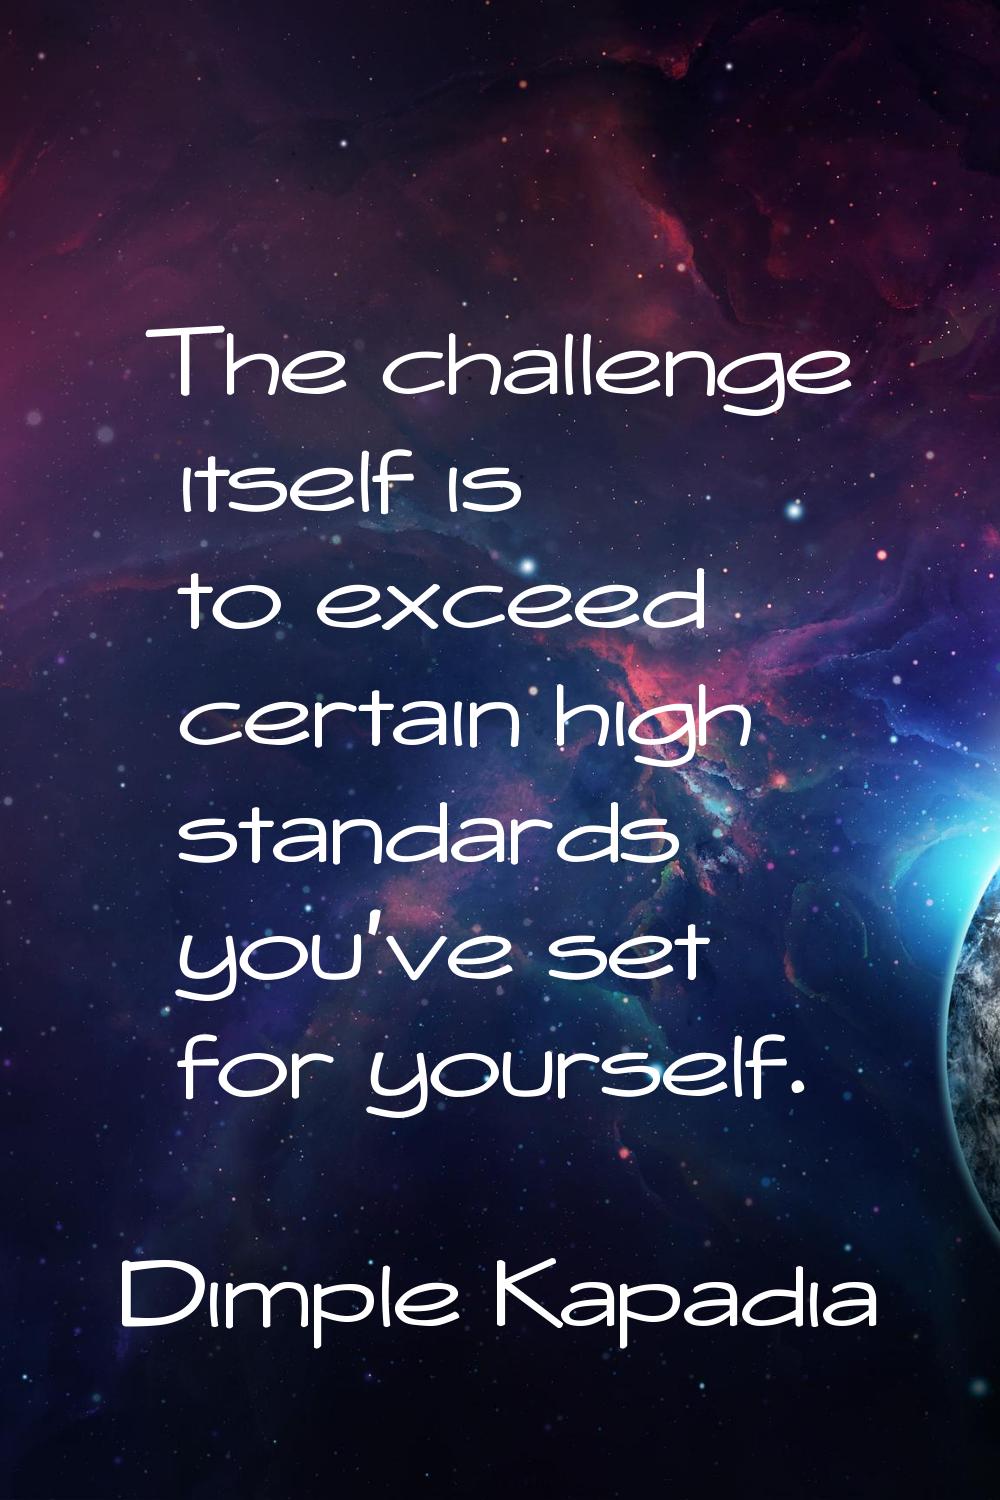 The challenge itself is to exceed certain high standards you've set for yourself.